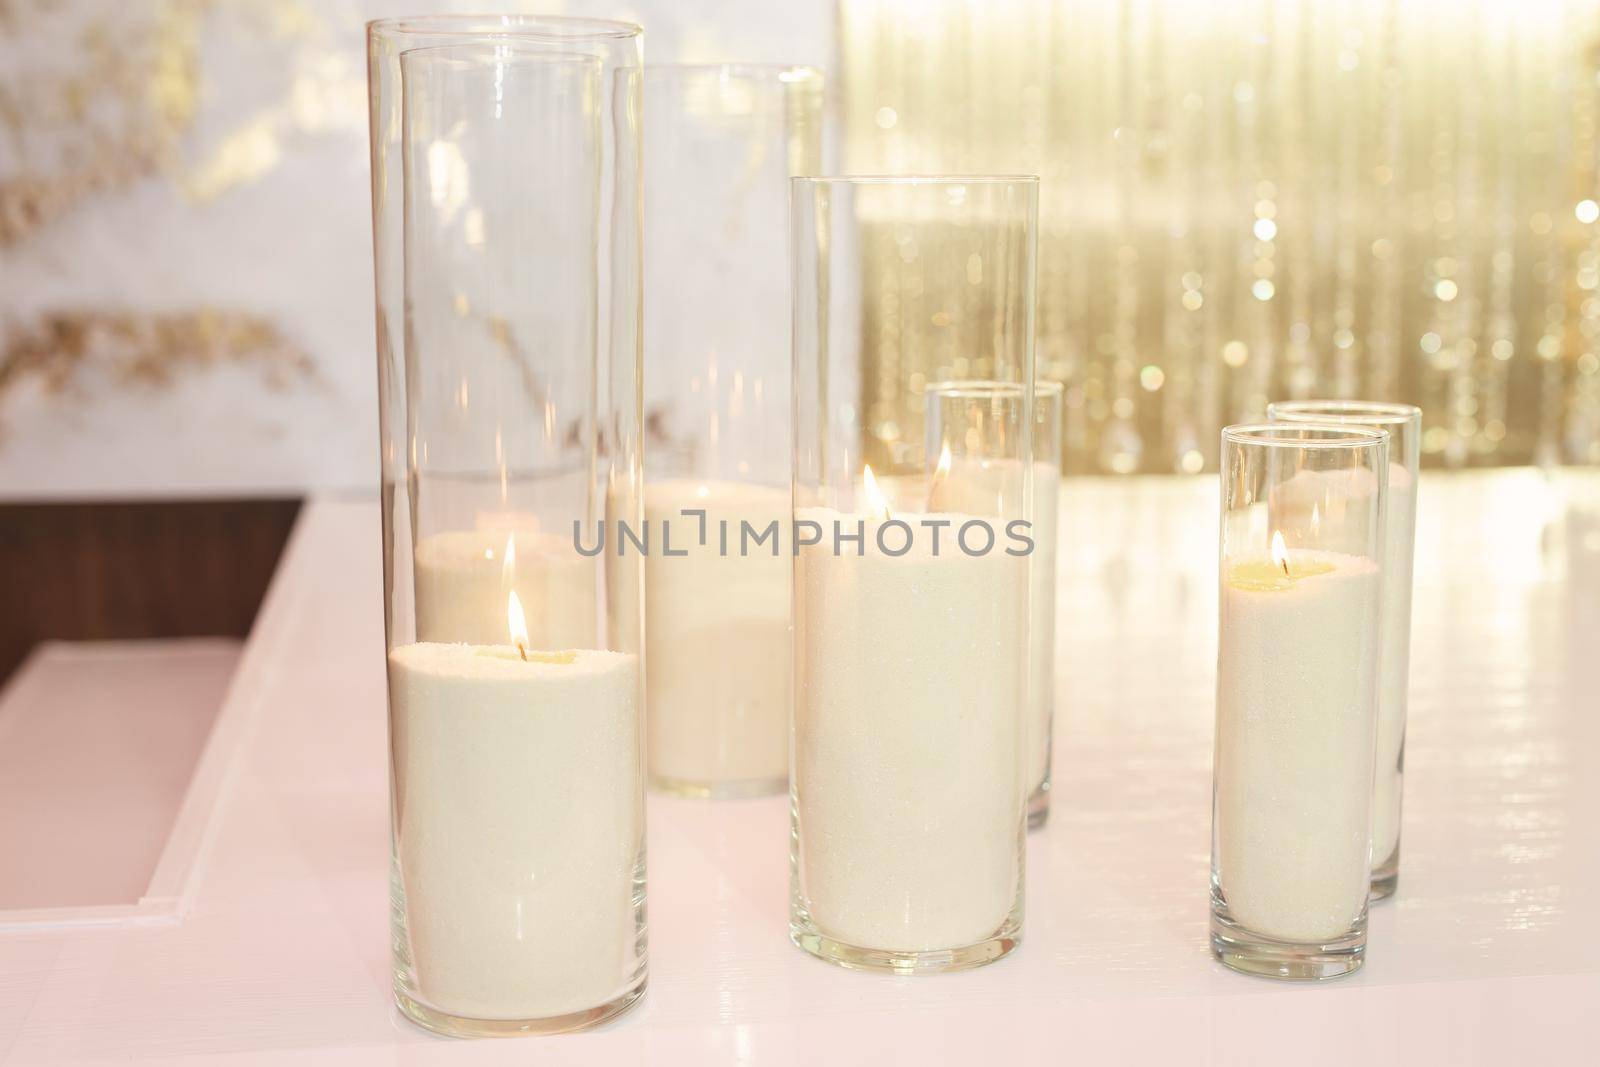 Wedding decor in white and gold style with candles and flowers.